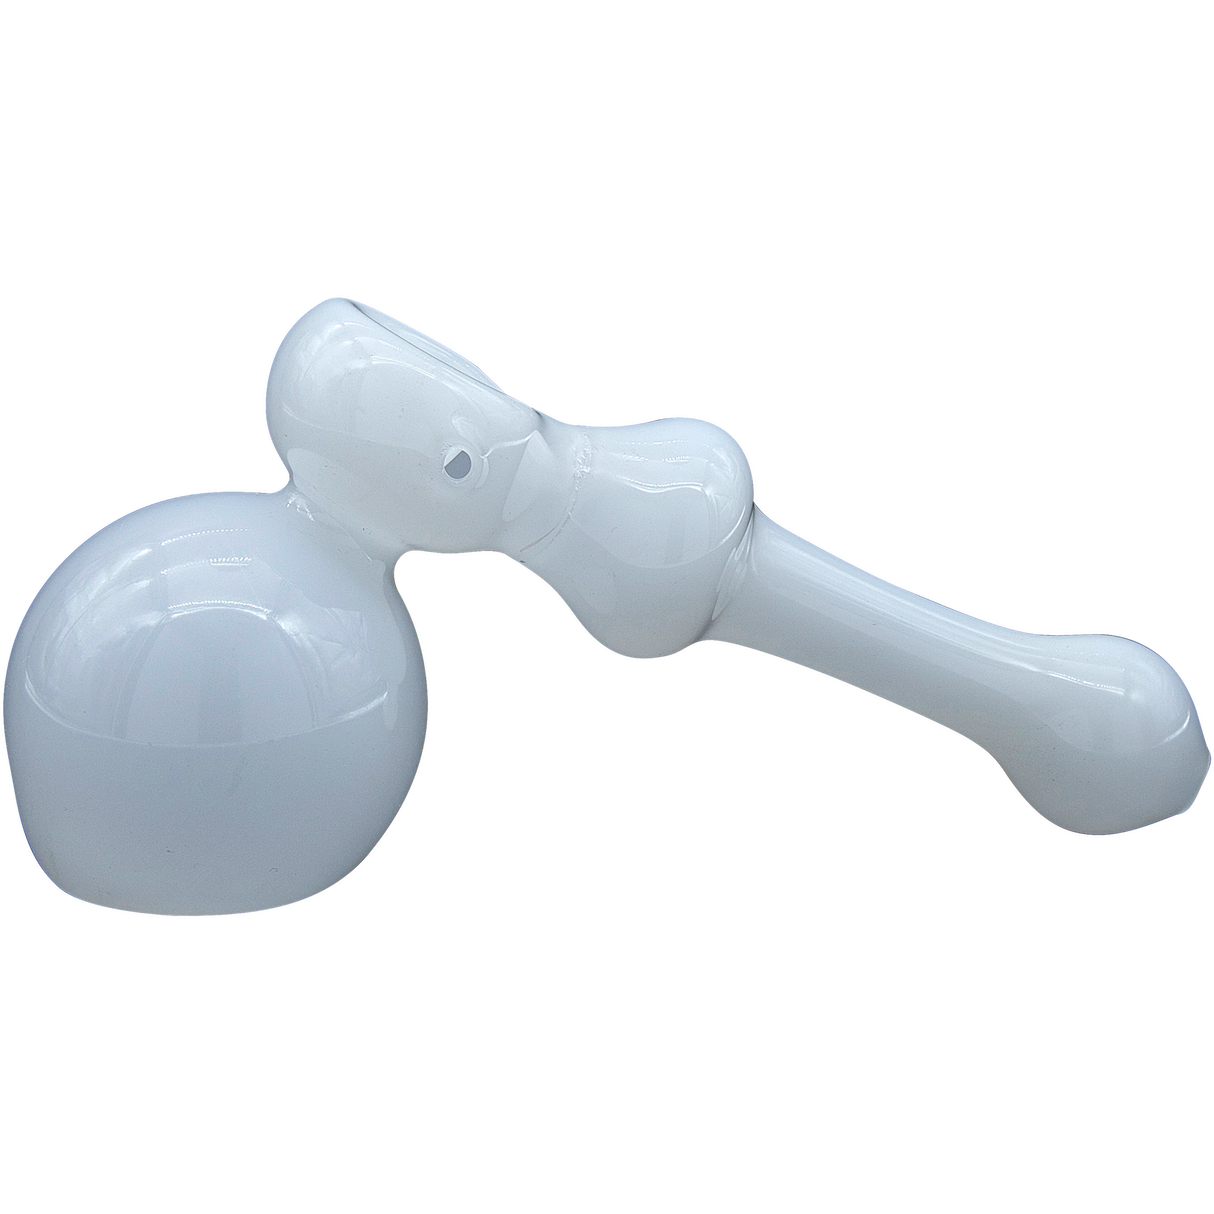 LA Pipes "Ivory Hammer" Glass Hammer Bubbler Pipe in white, compact design for dry herbs, side view